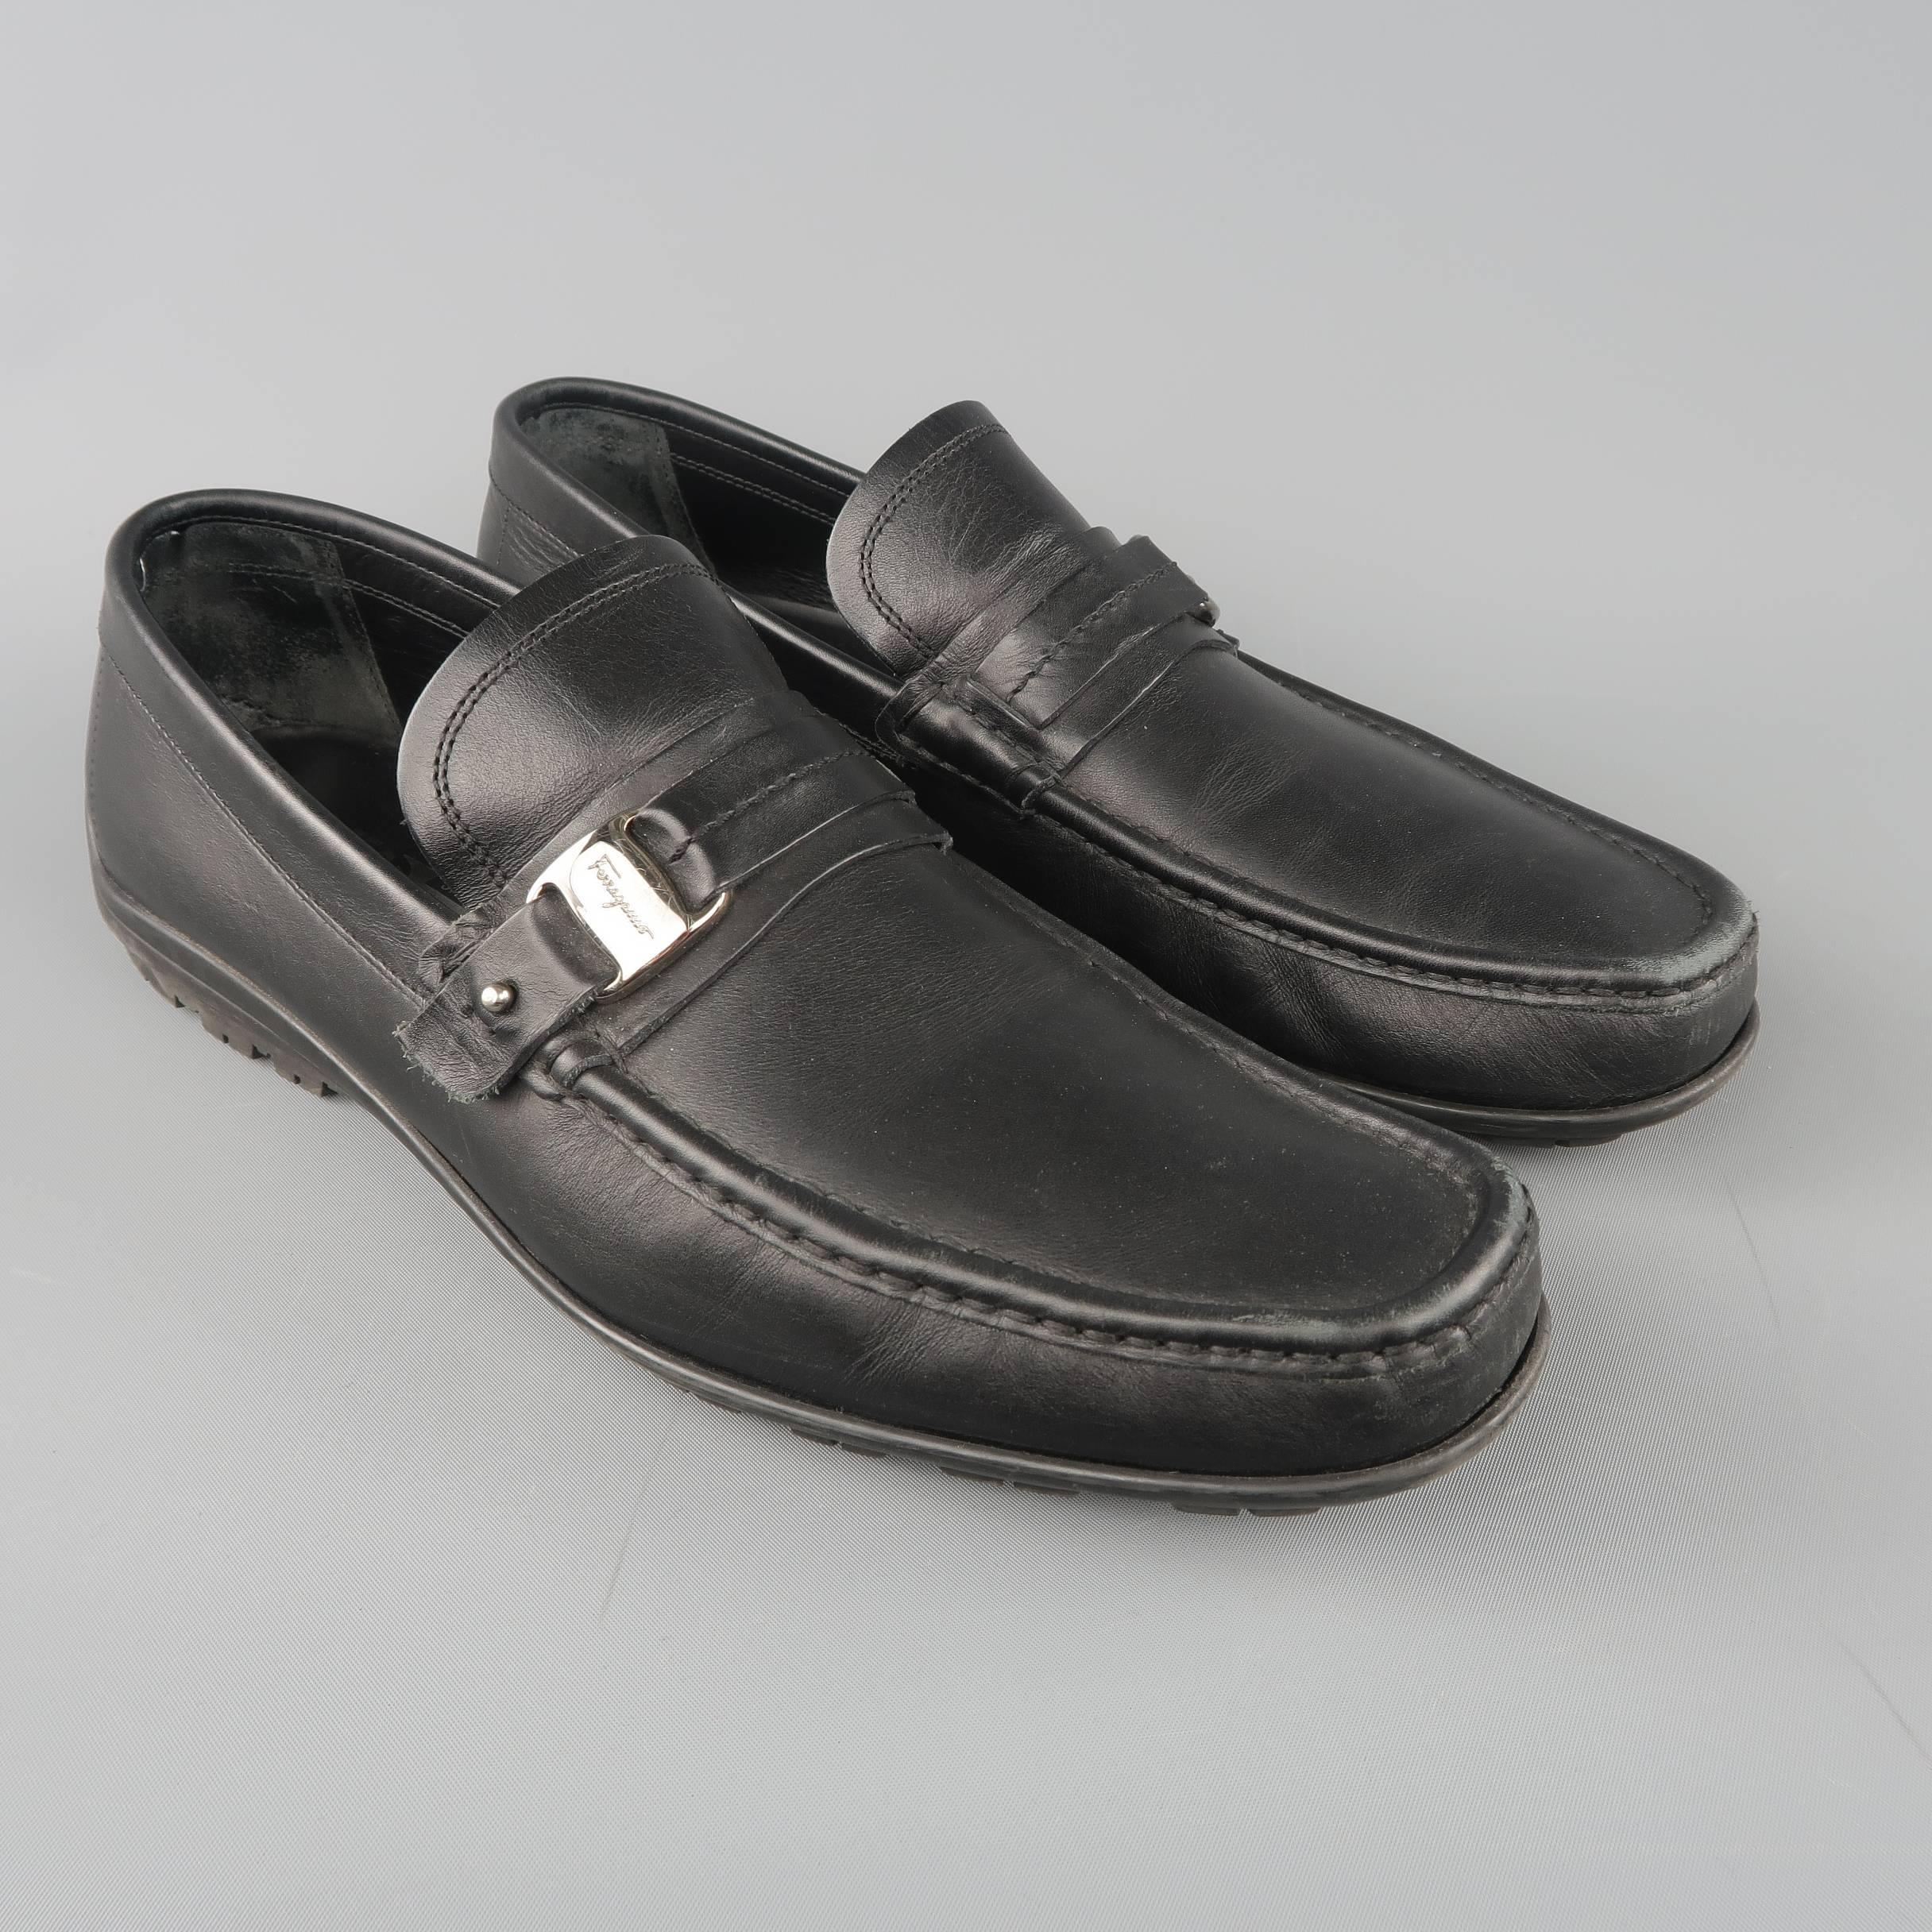 SALVATORE FERRAGAMO loafers come in black leather with a squared point apron toe, driver sole, and strap with silver tone embossed detail. Made in Italy.
 
Good Pre-Owned Condition.
Marked: UK 10
 
Outsole: 12 x 4 in.